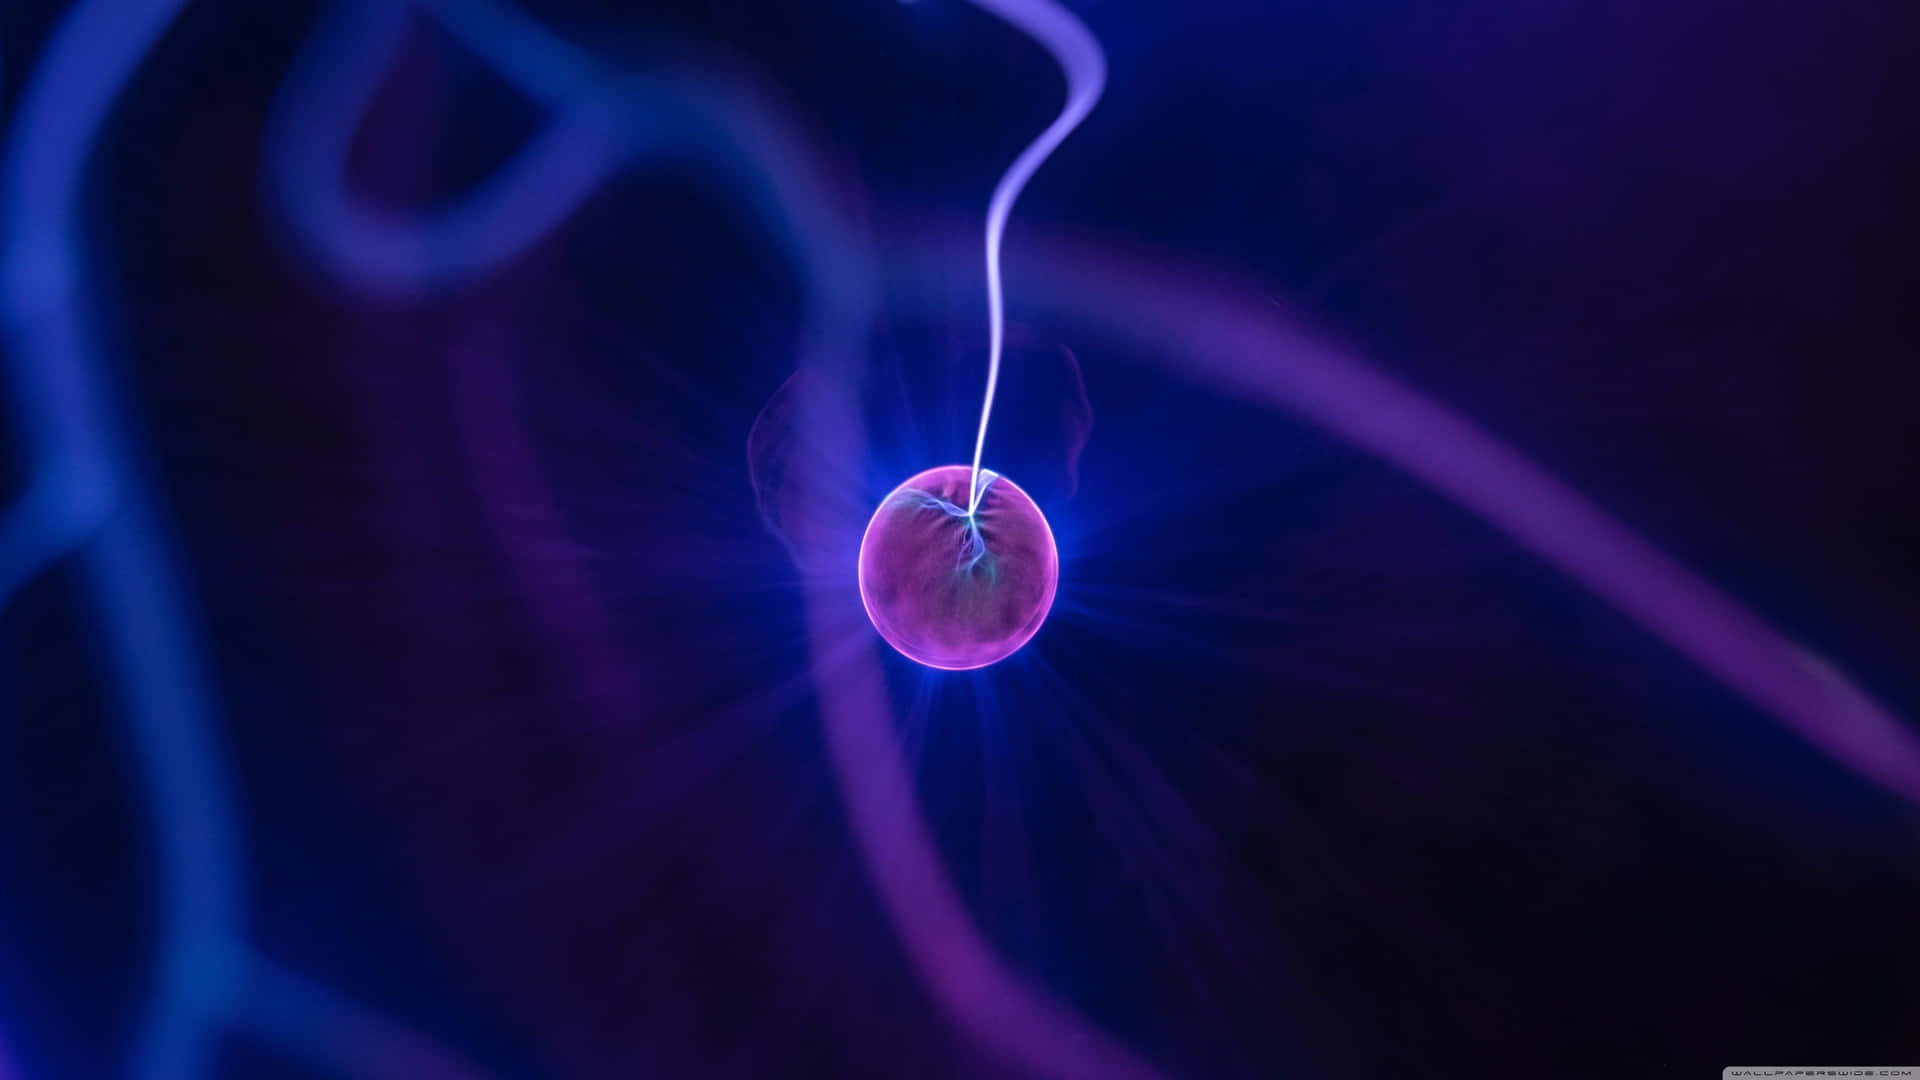 Explore the electric beauty of an electrically-charged plasma Wallpaper